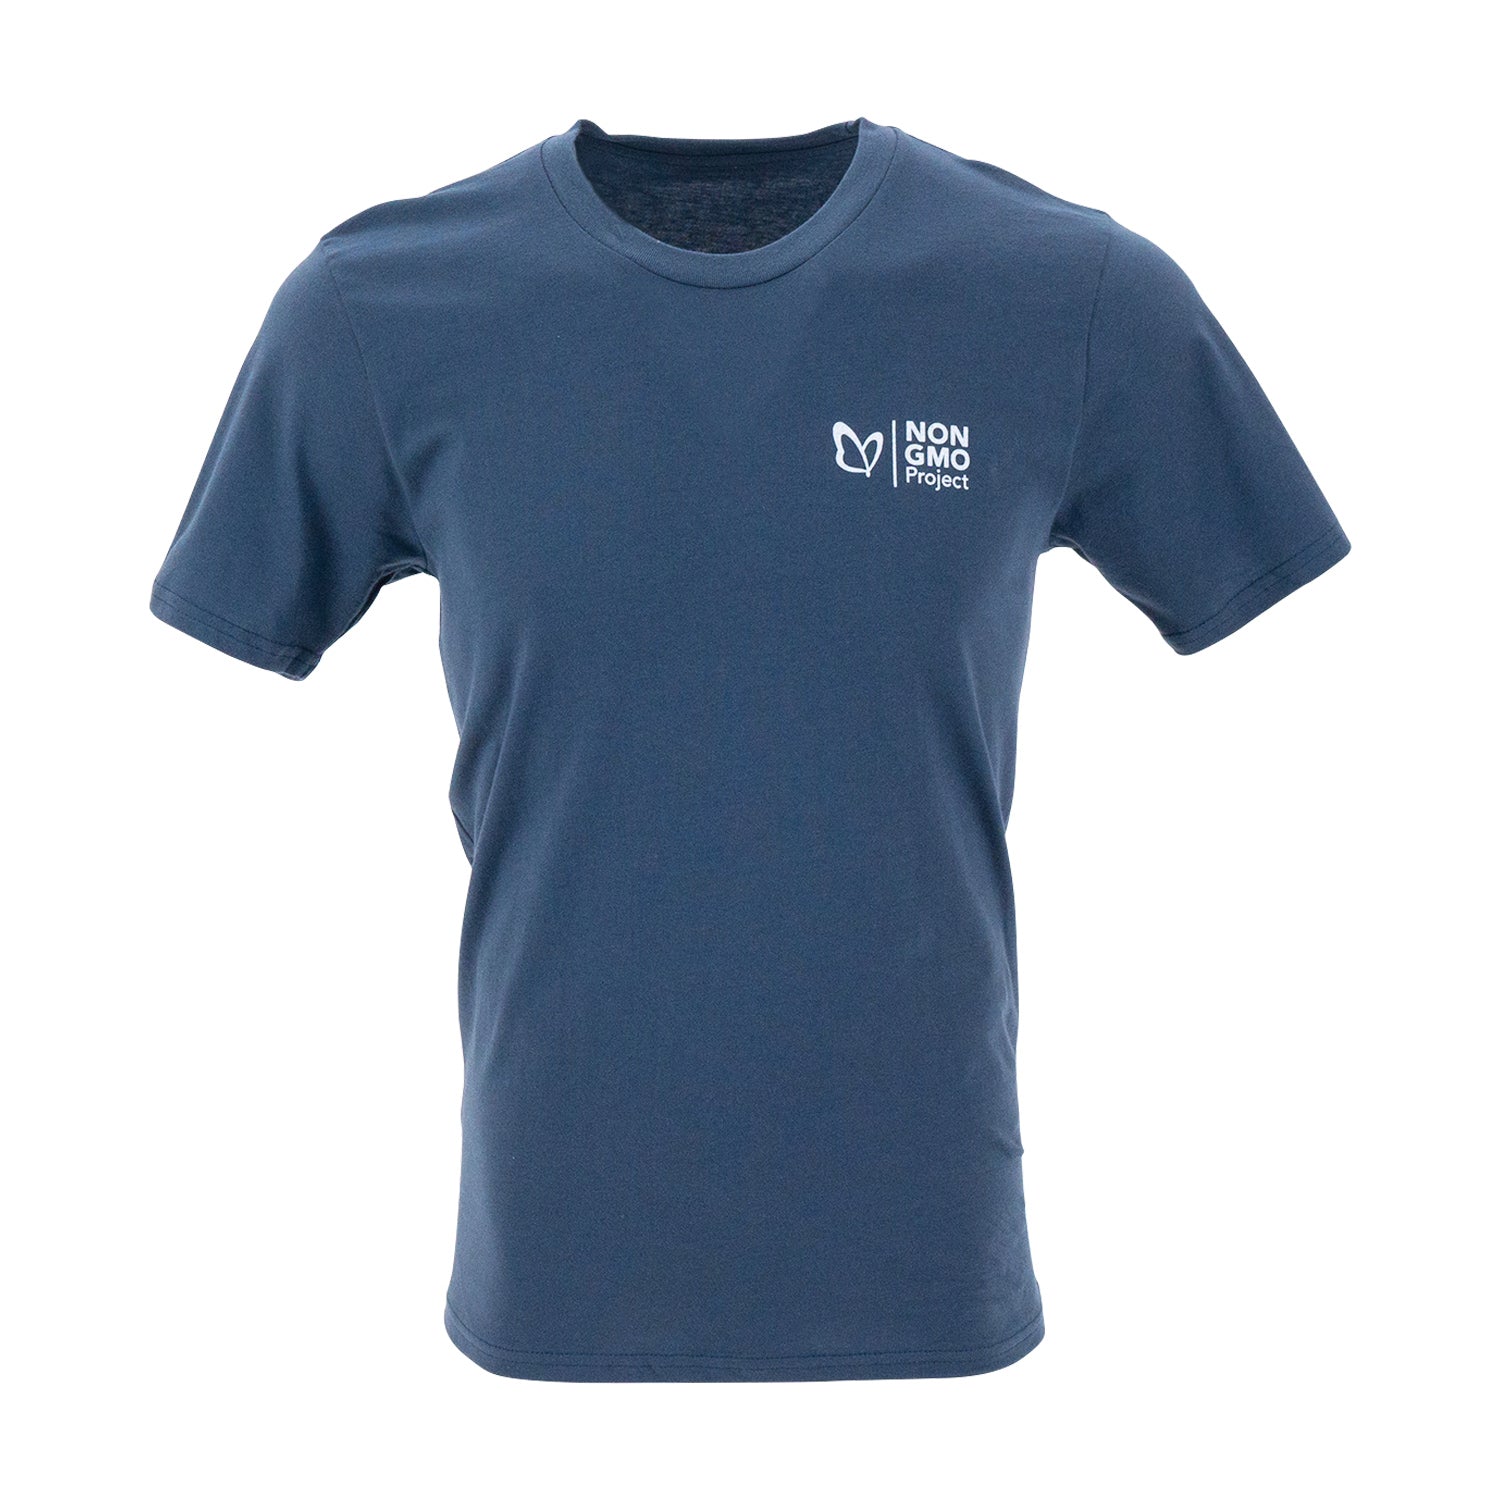 Non-GMO Project navy blue t-shirt front, with logo on chest area